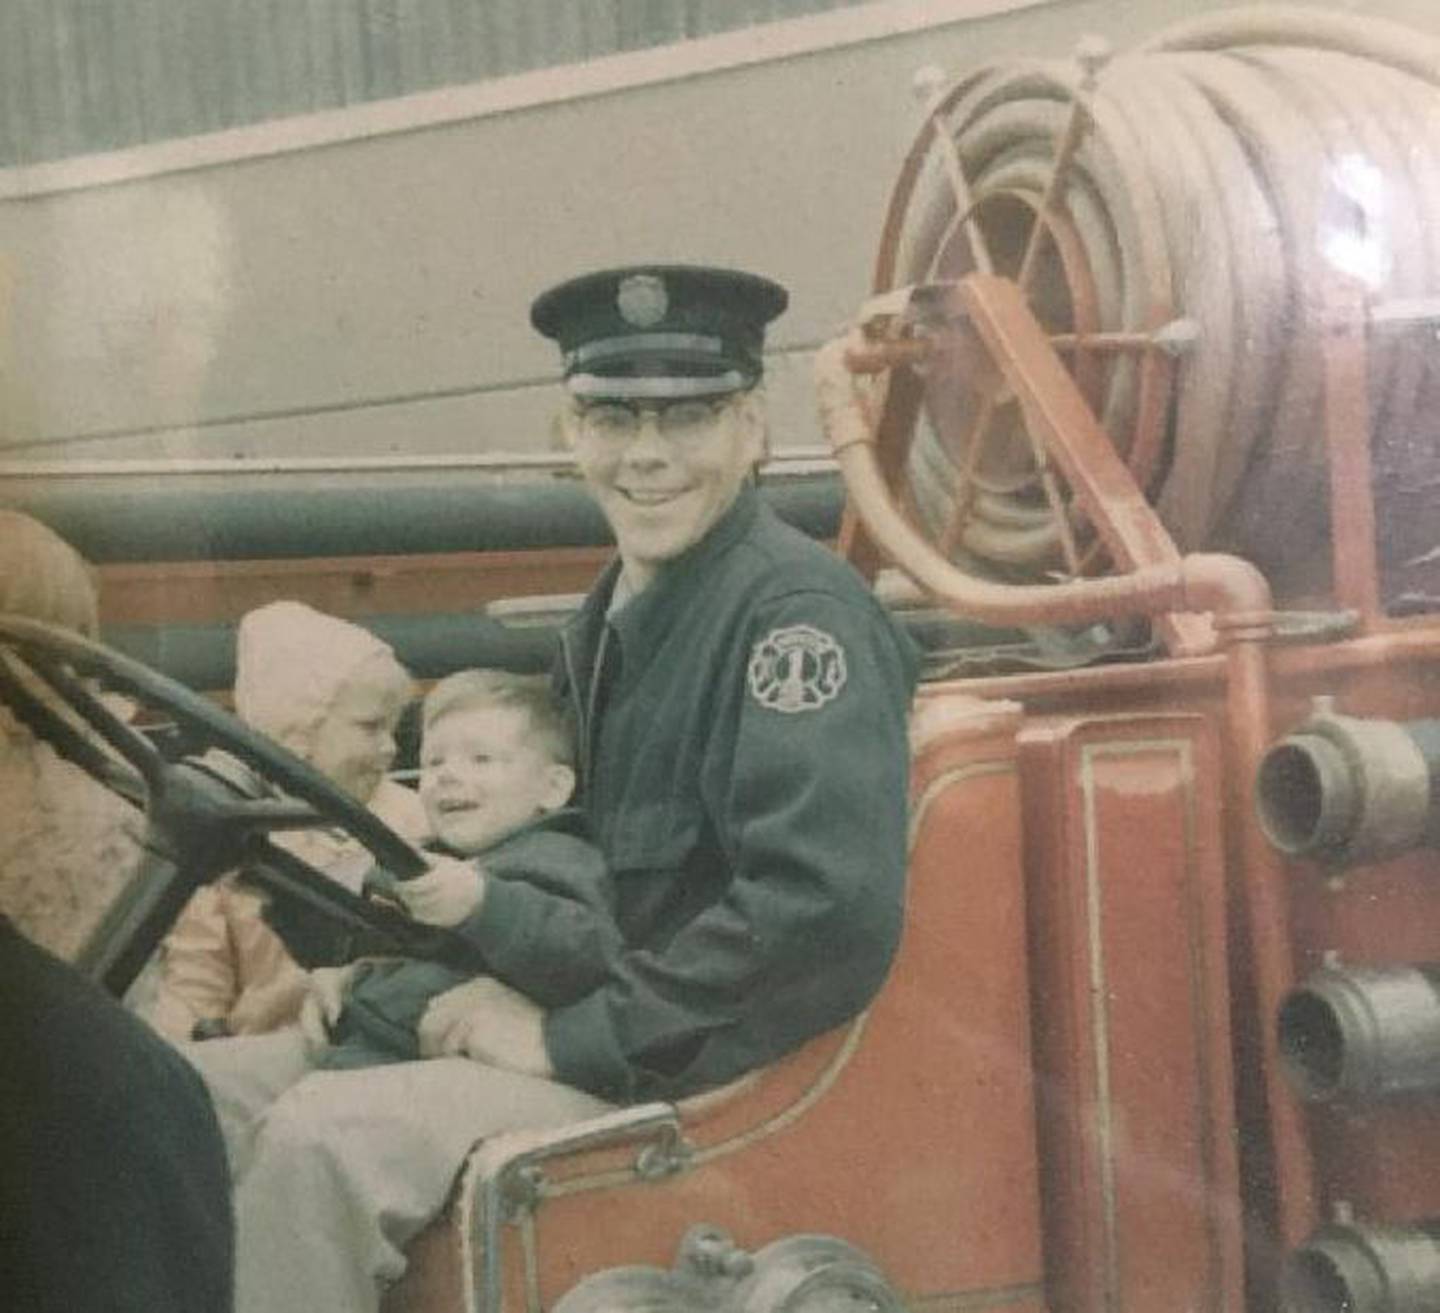 Jeff VanPatten is pictured on his father, Jerry's, lap with an unidentified child. The family's 108-year tradition with Antioch's fire department has ended with Jeff's retirement after 35 years.